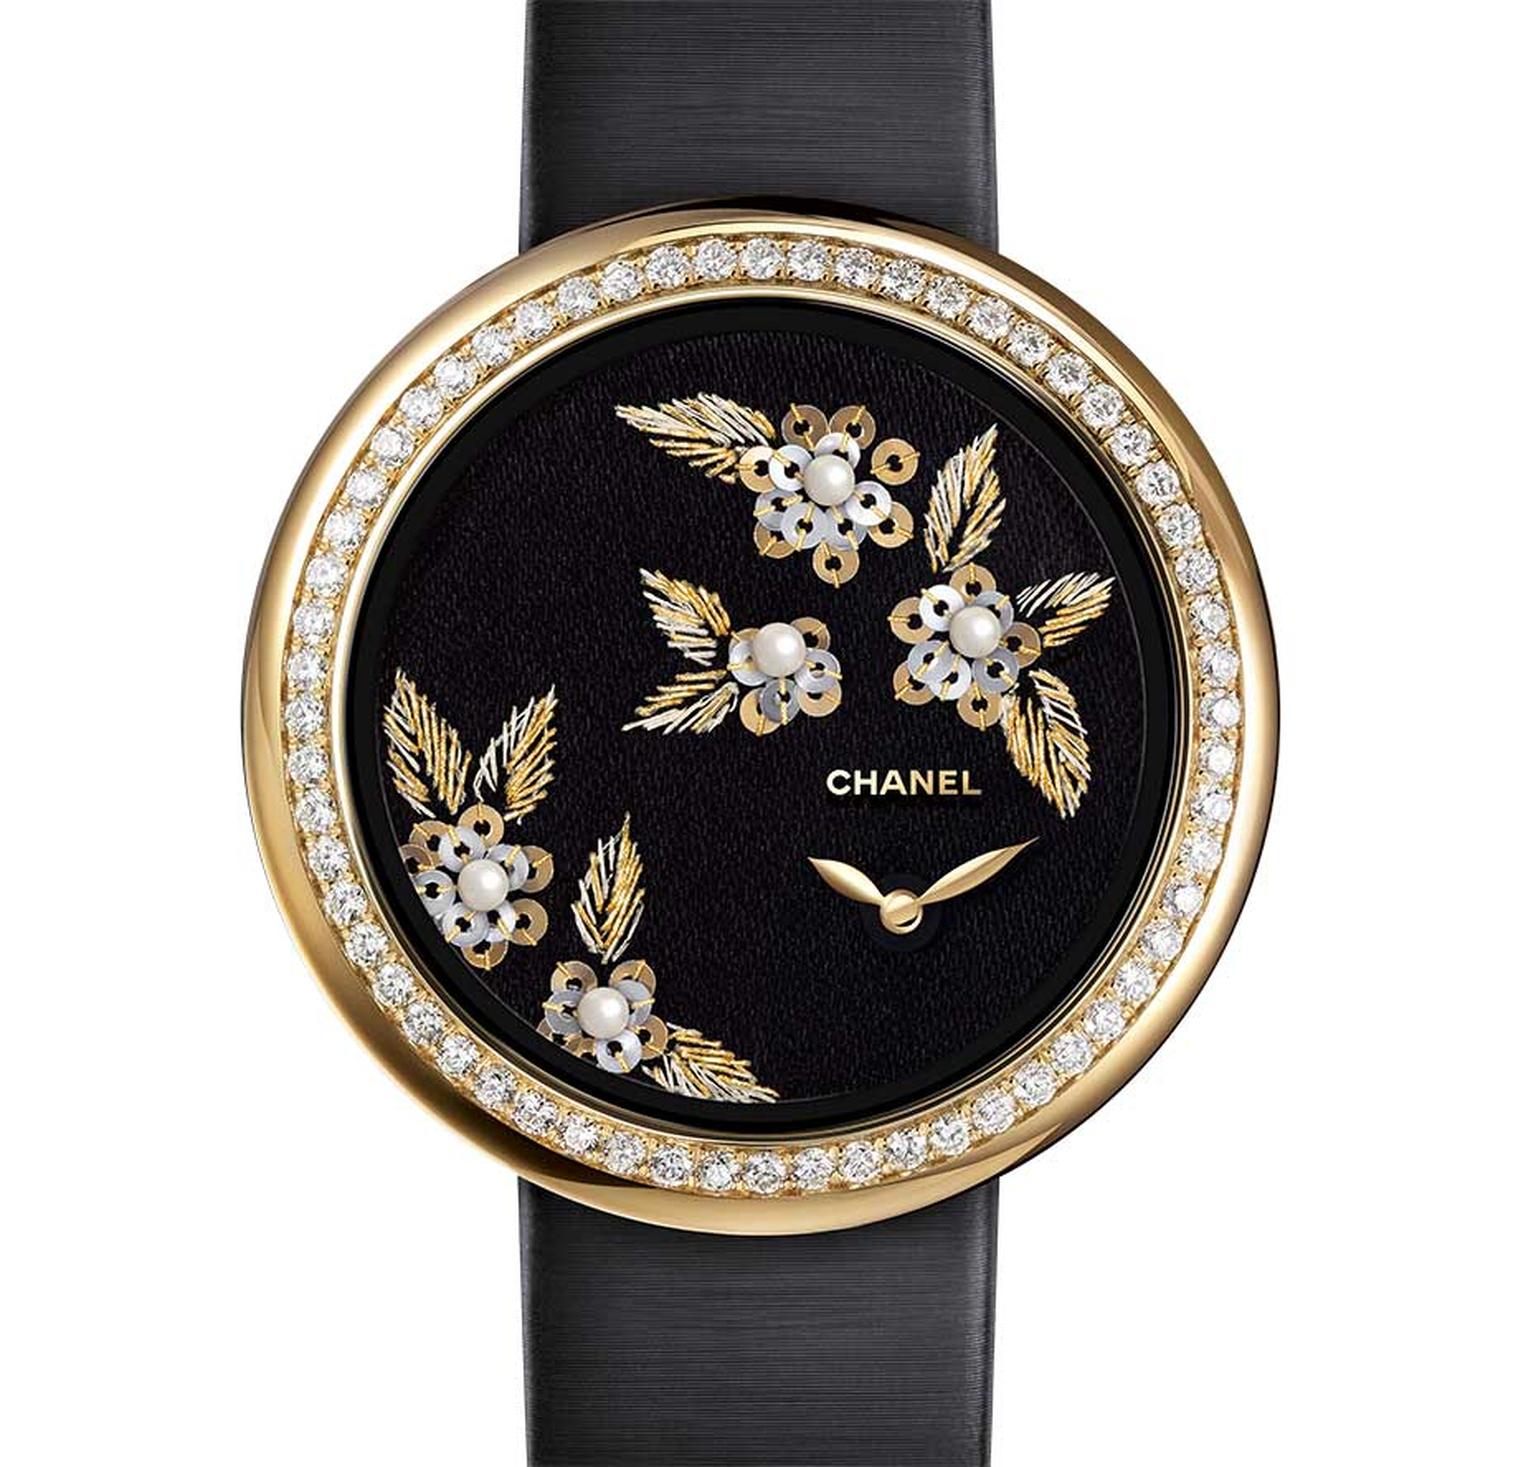 Chanel Reissues Iconic Première Watch to Mark 35th Anniversary